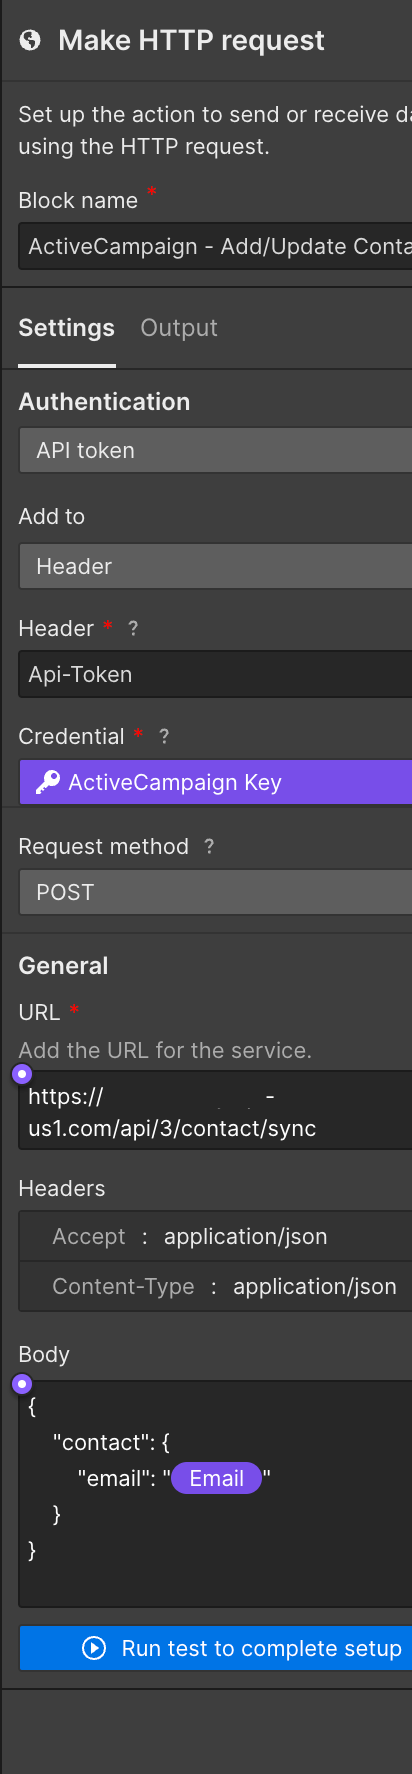 Webflow Logic Action to add email to ActiveCampaign